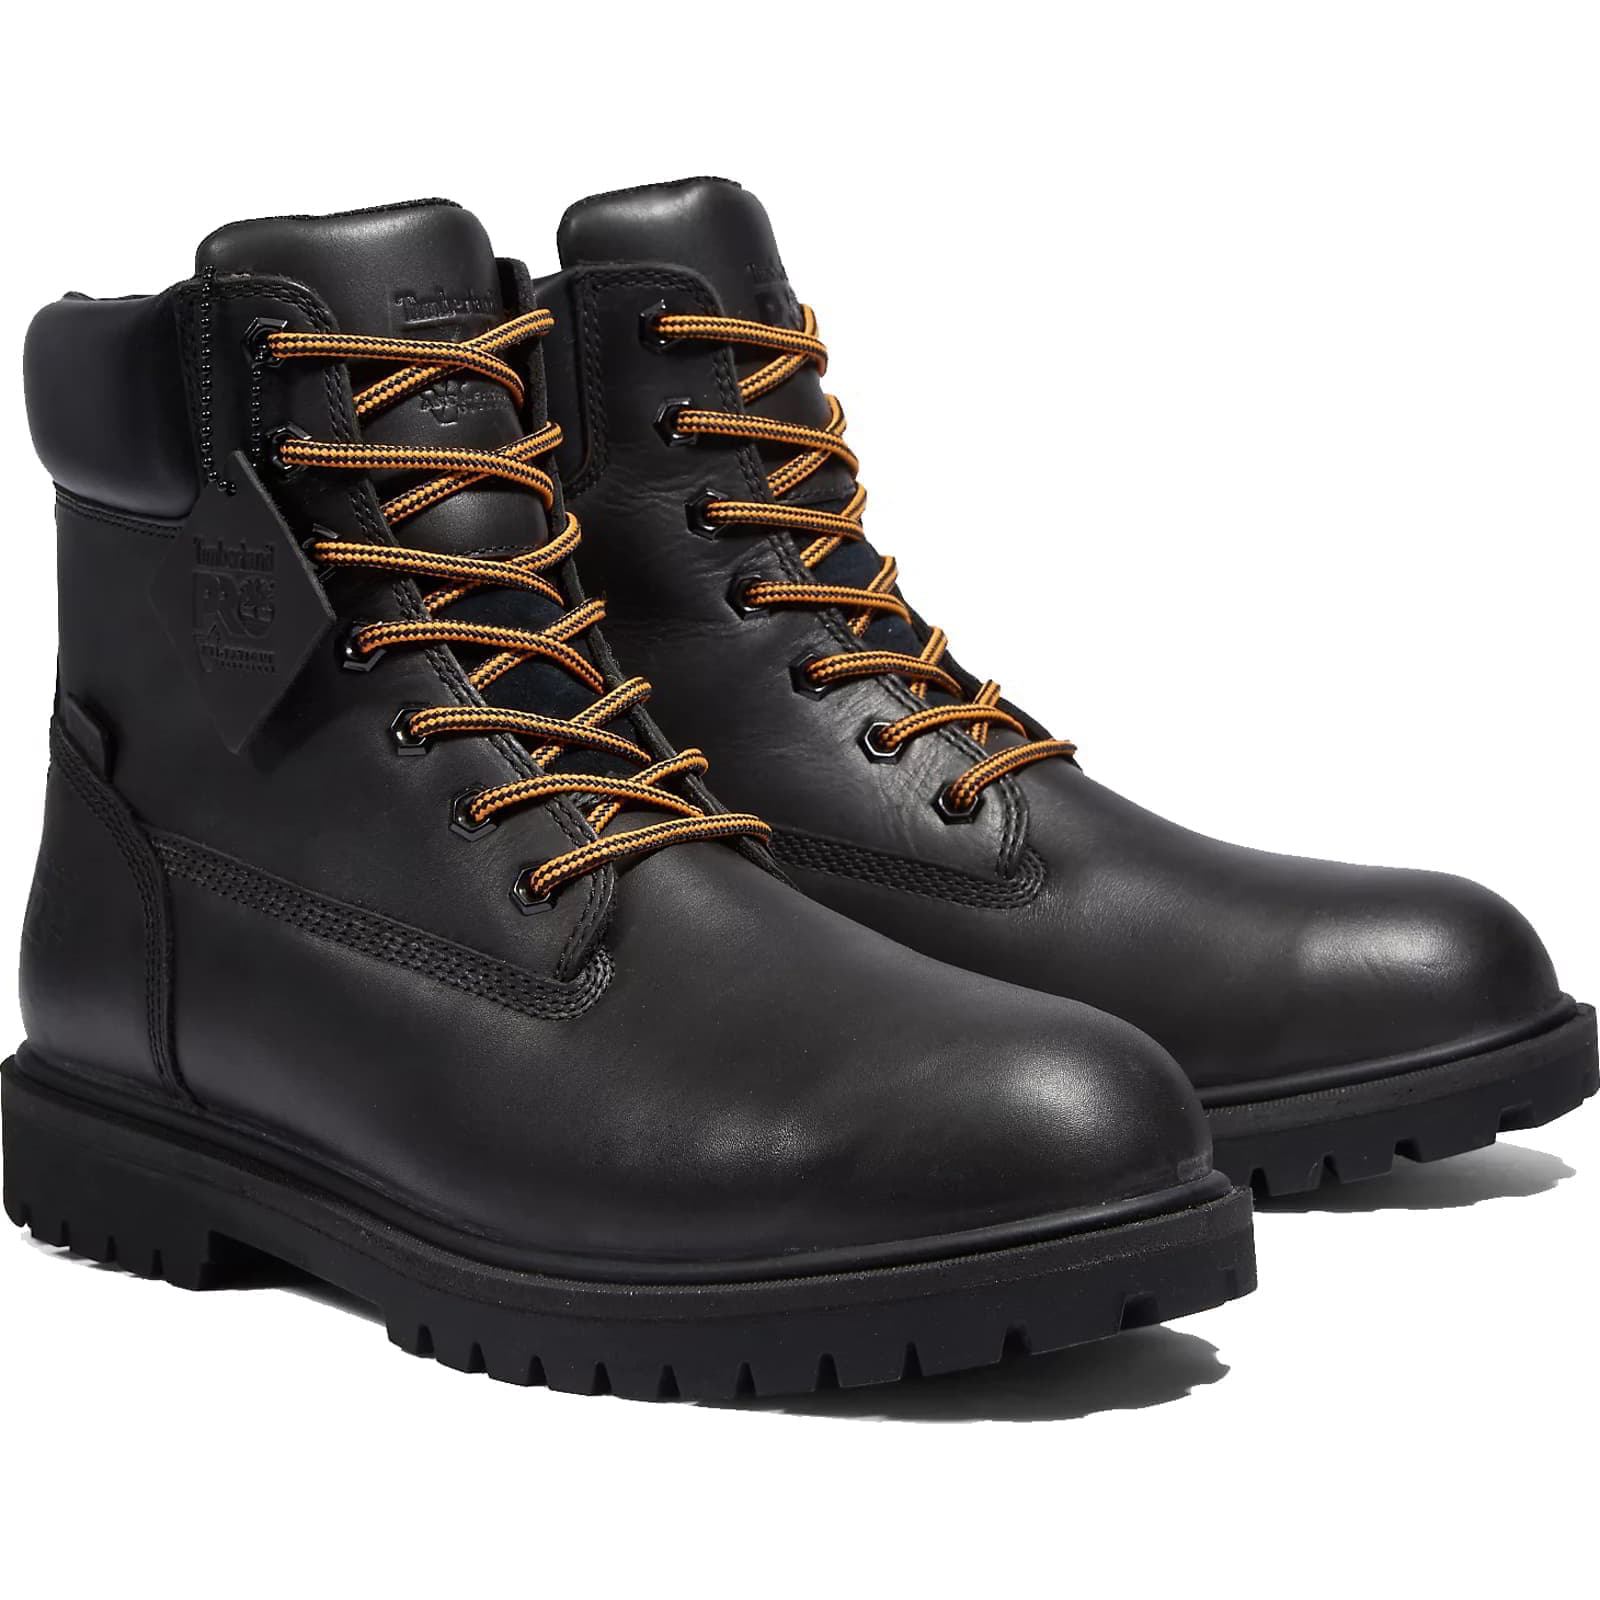 Timberland Pro Mens Iconic Waterproof Safety Toe Cap Work Ankle Boots - UK 6